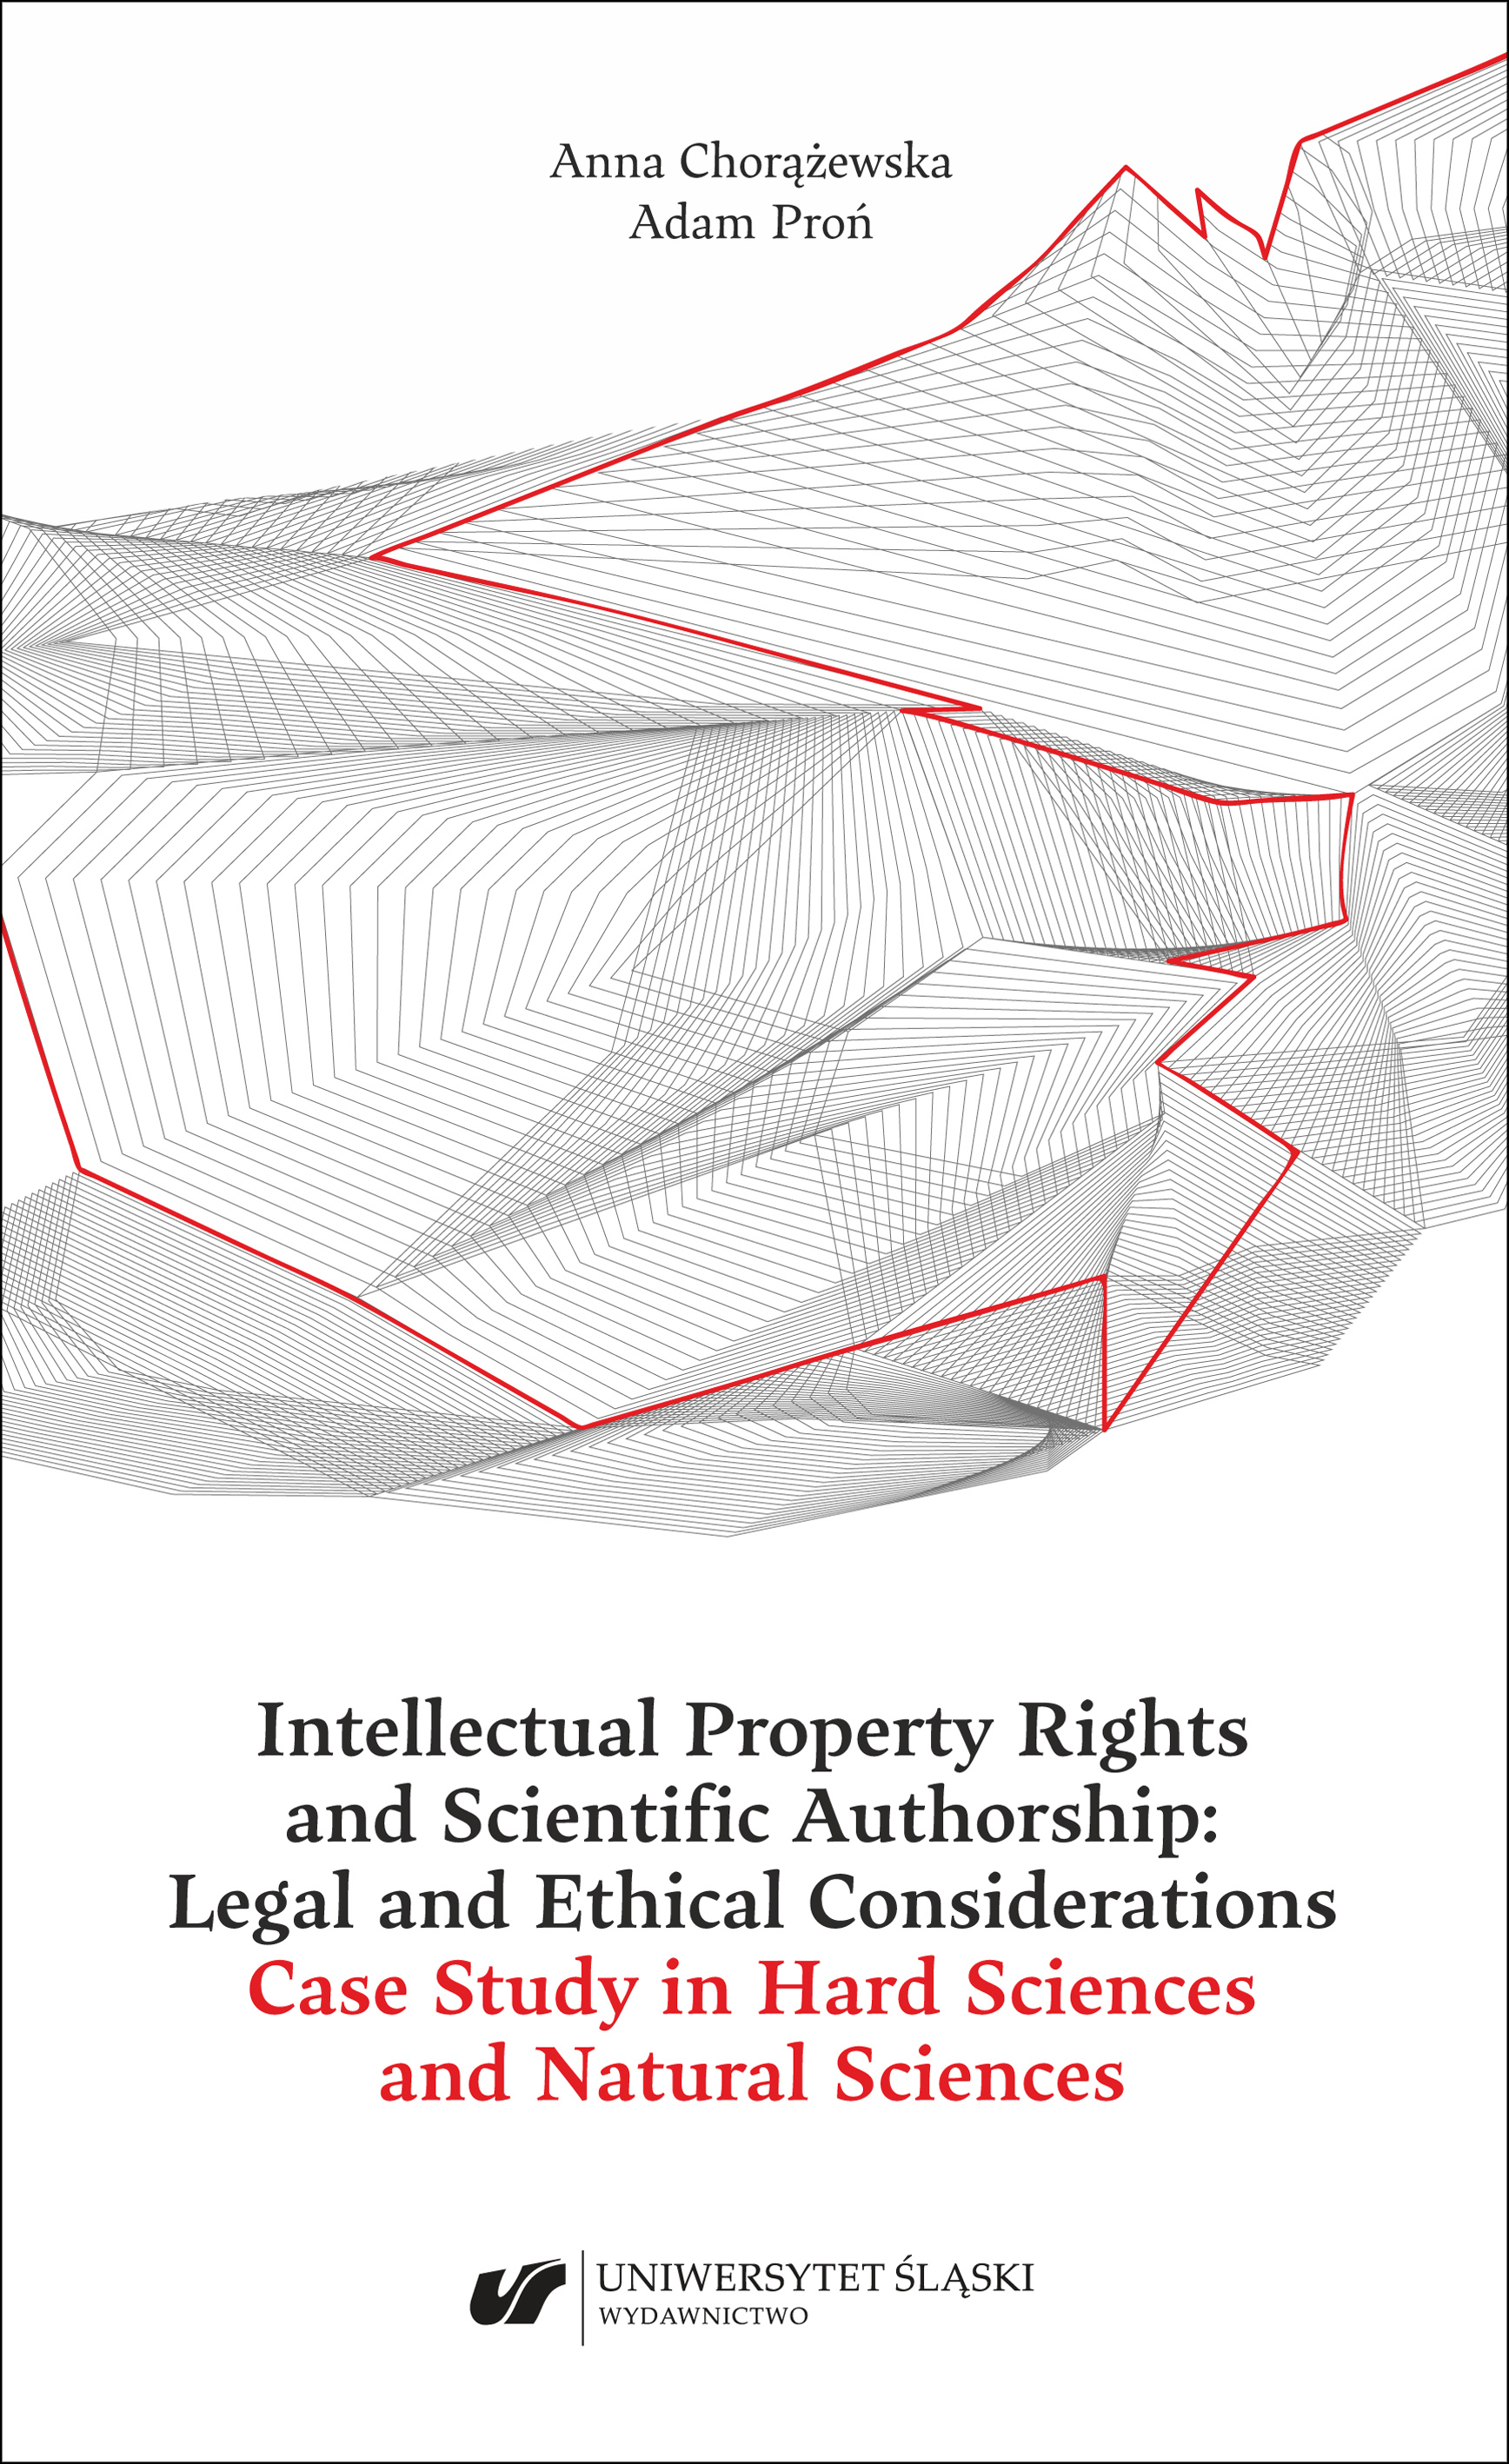 Intellectual Property Rights and Scientific Authorship: Legal and Ethical Considerations Case Study in Hard Sciences and Natural Sciences